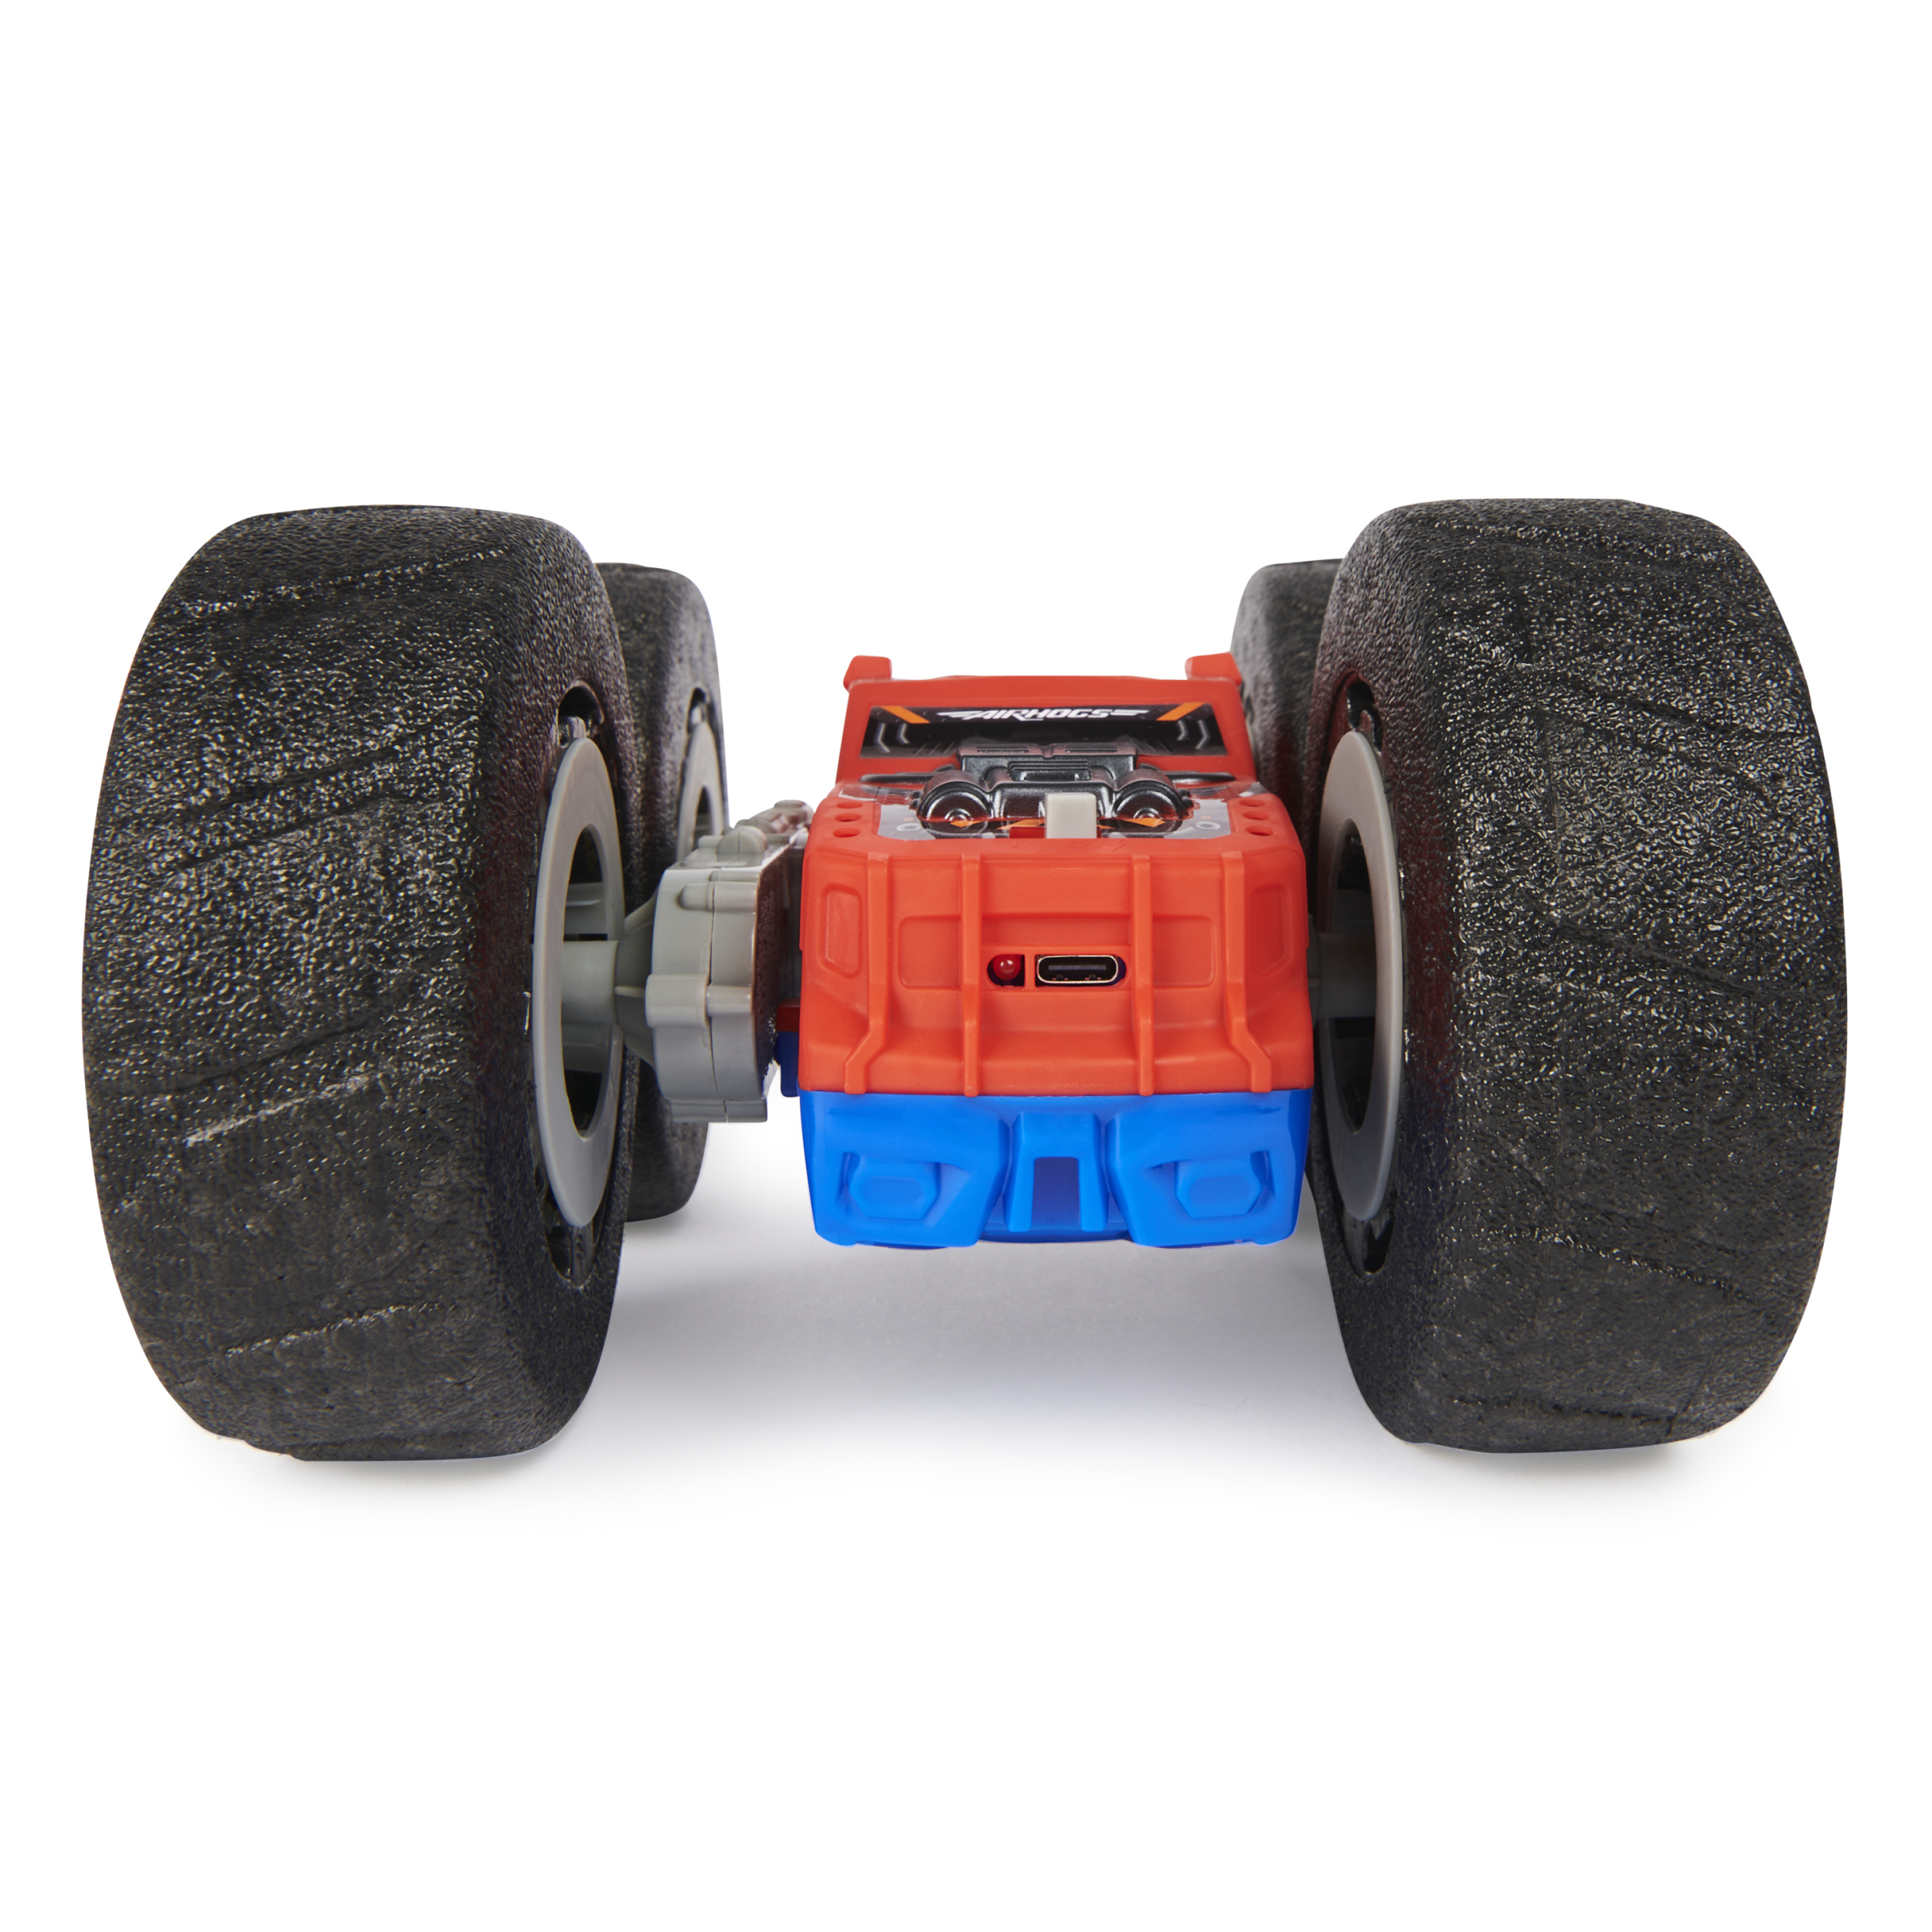 Air Hogs Super Soft, Flippin Frenzy 2-in-1 Stunt RC Vehicle - image 4 of 6